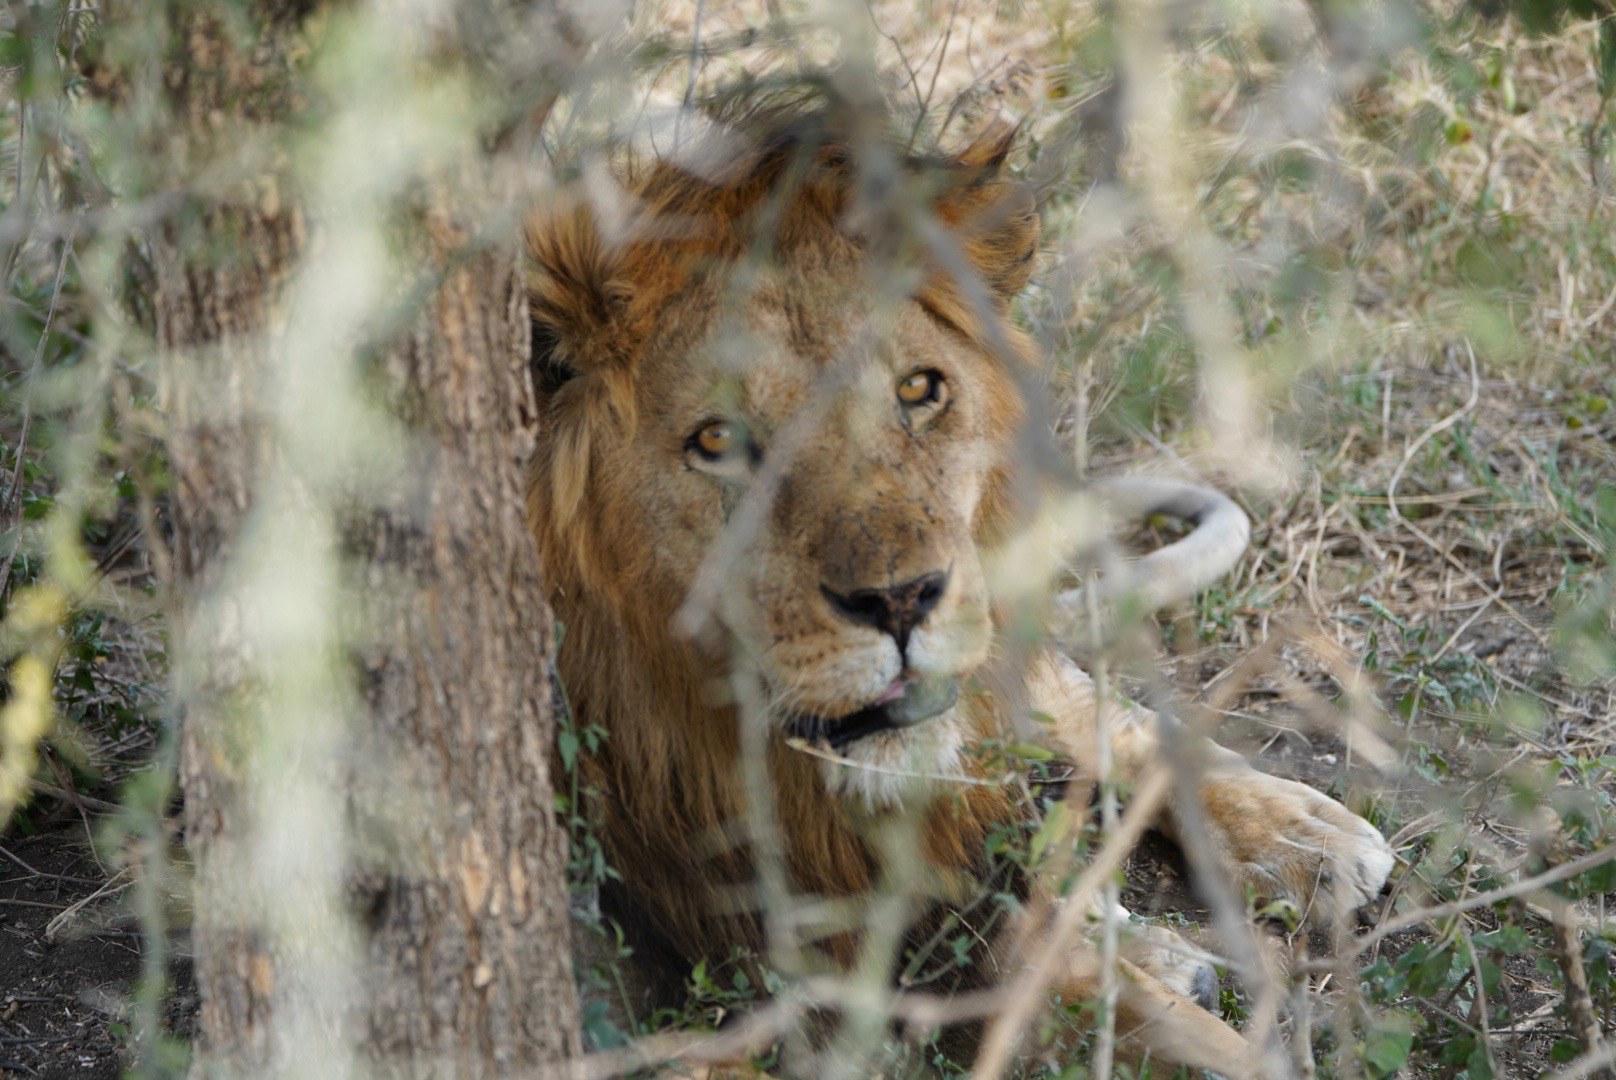 A lion with warm eyes looks to the camera, hidden slightly behind the leaves and branches of a tree. He takes up most of the frame.